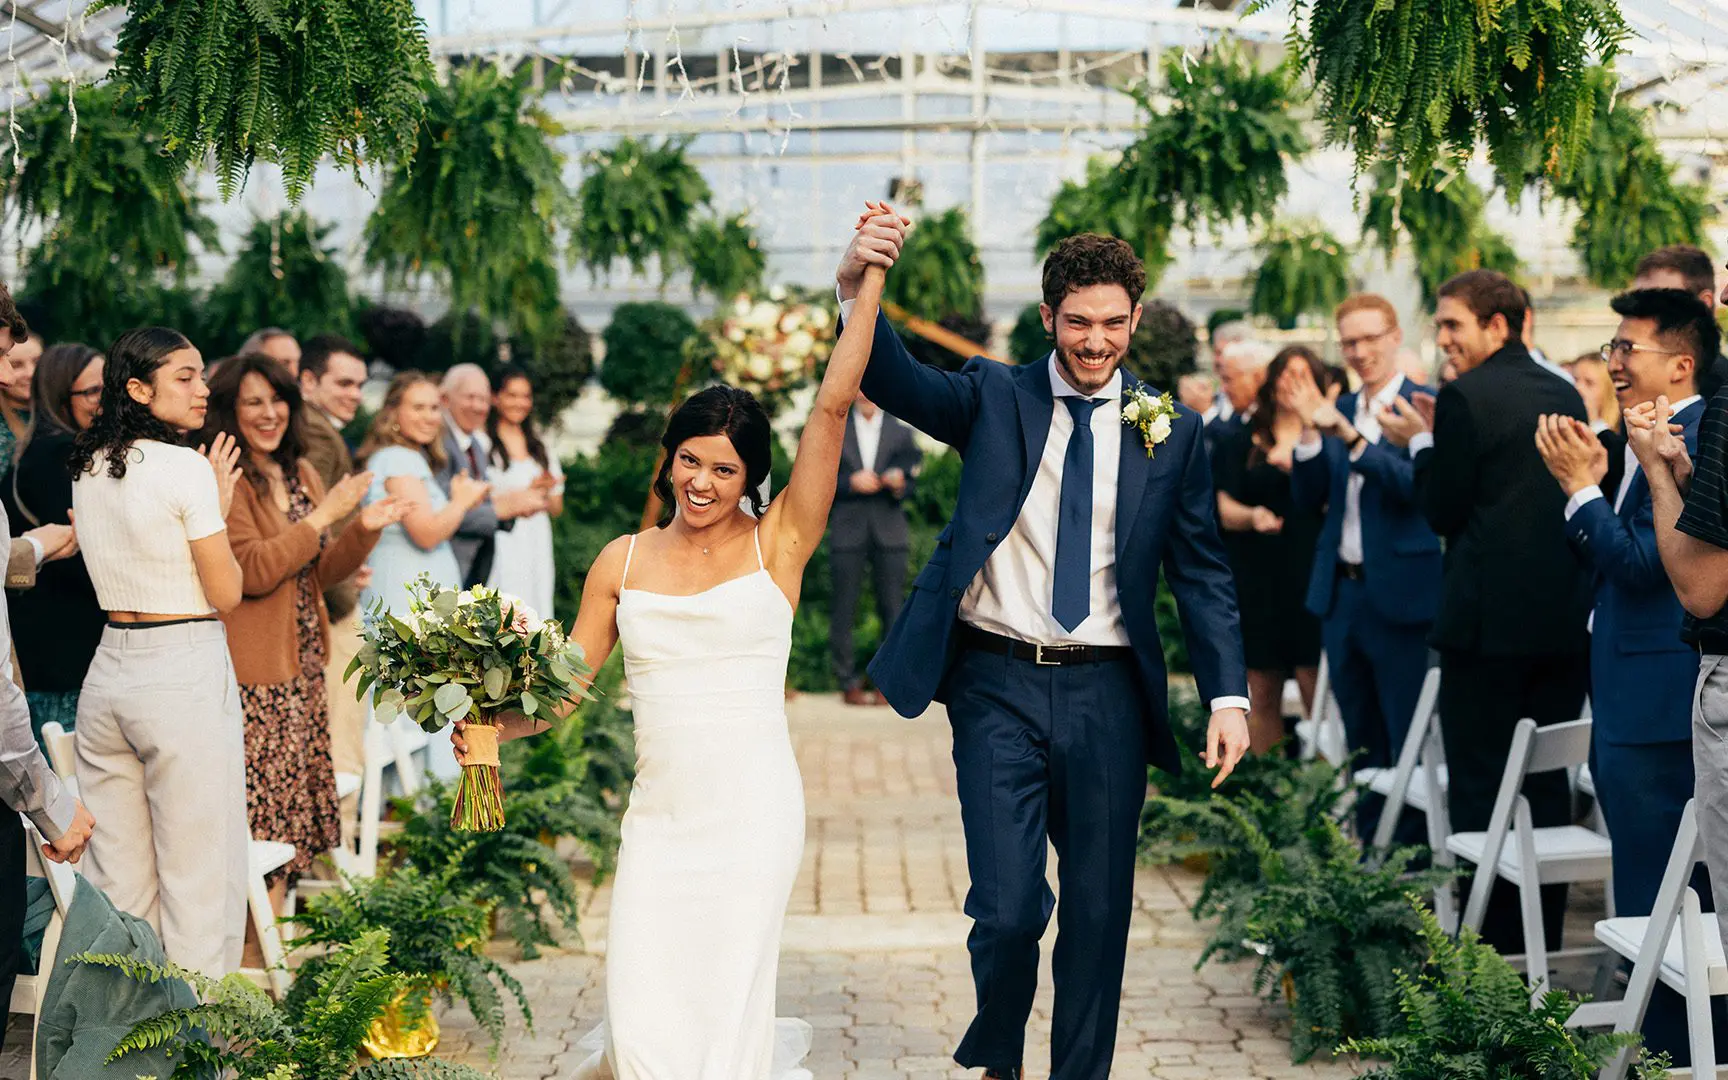 Newlywed couple joyfully walking down the aisle, holding hands and smiling, surrounded by applauding guests in a greenhouse setting.